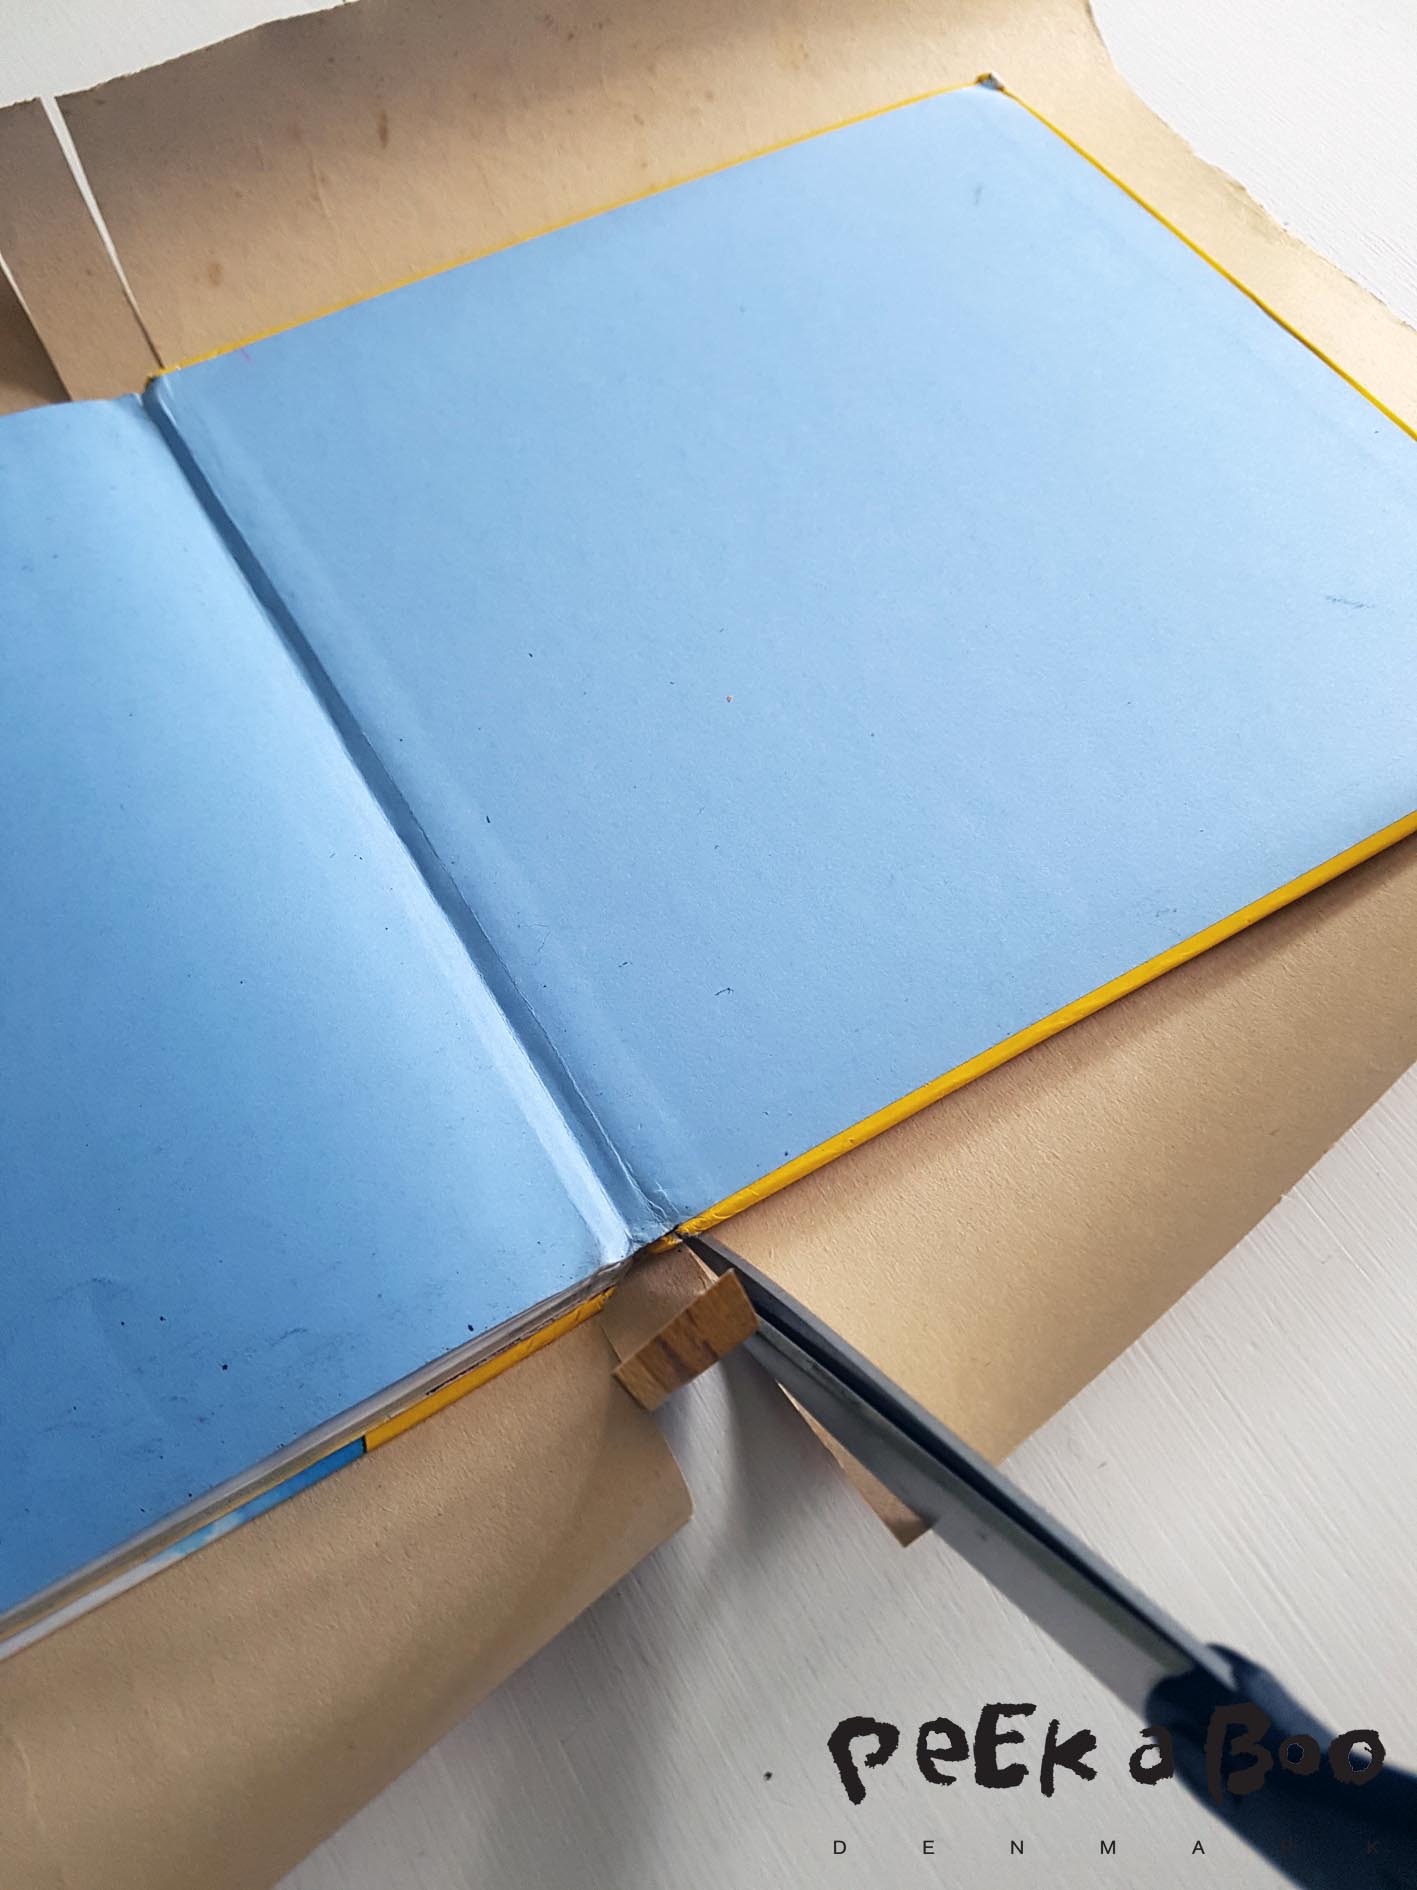 Place the book in the middle and cut slits by the back. Same width as the back of your book.